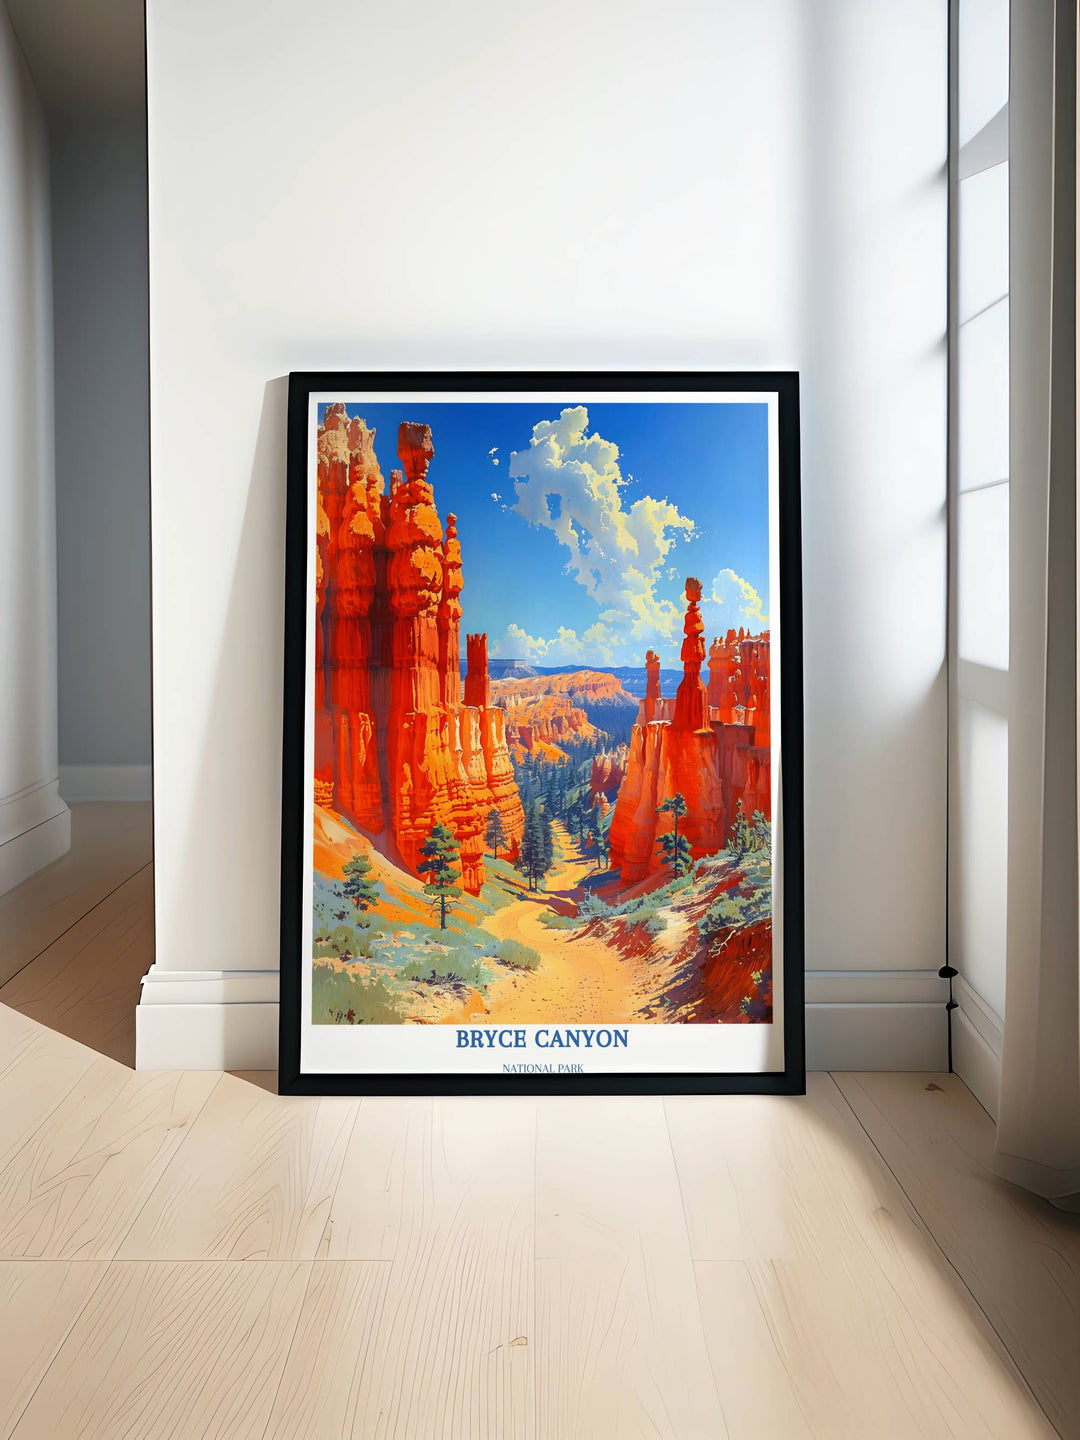 Breathtaking Bryce Canyon Utah poster capturing the iconic hoodoos and vast landscapes. Perfect National Park gift, art, and Utah print for desert wall art enthusiasts